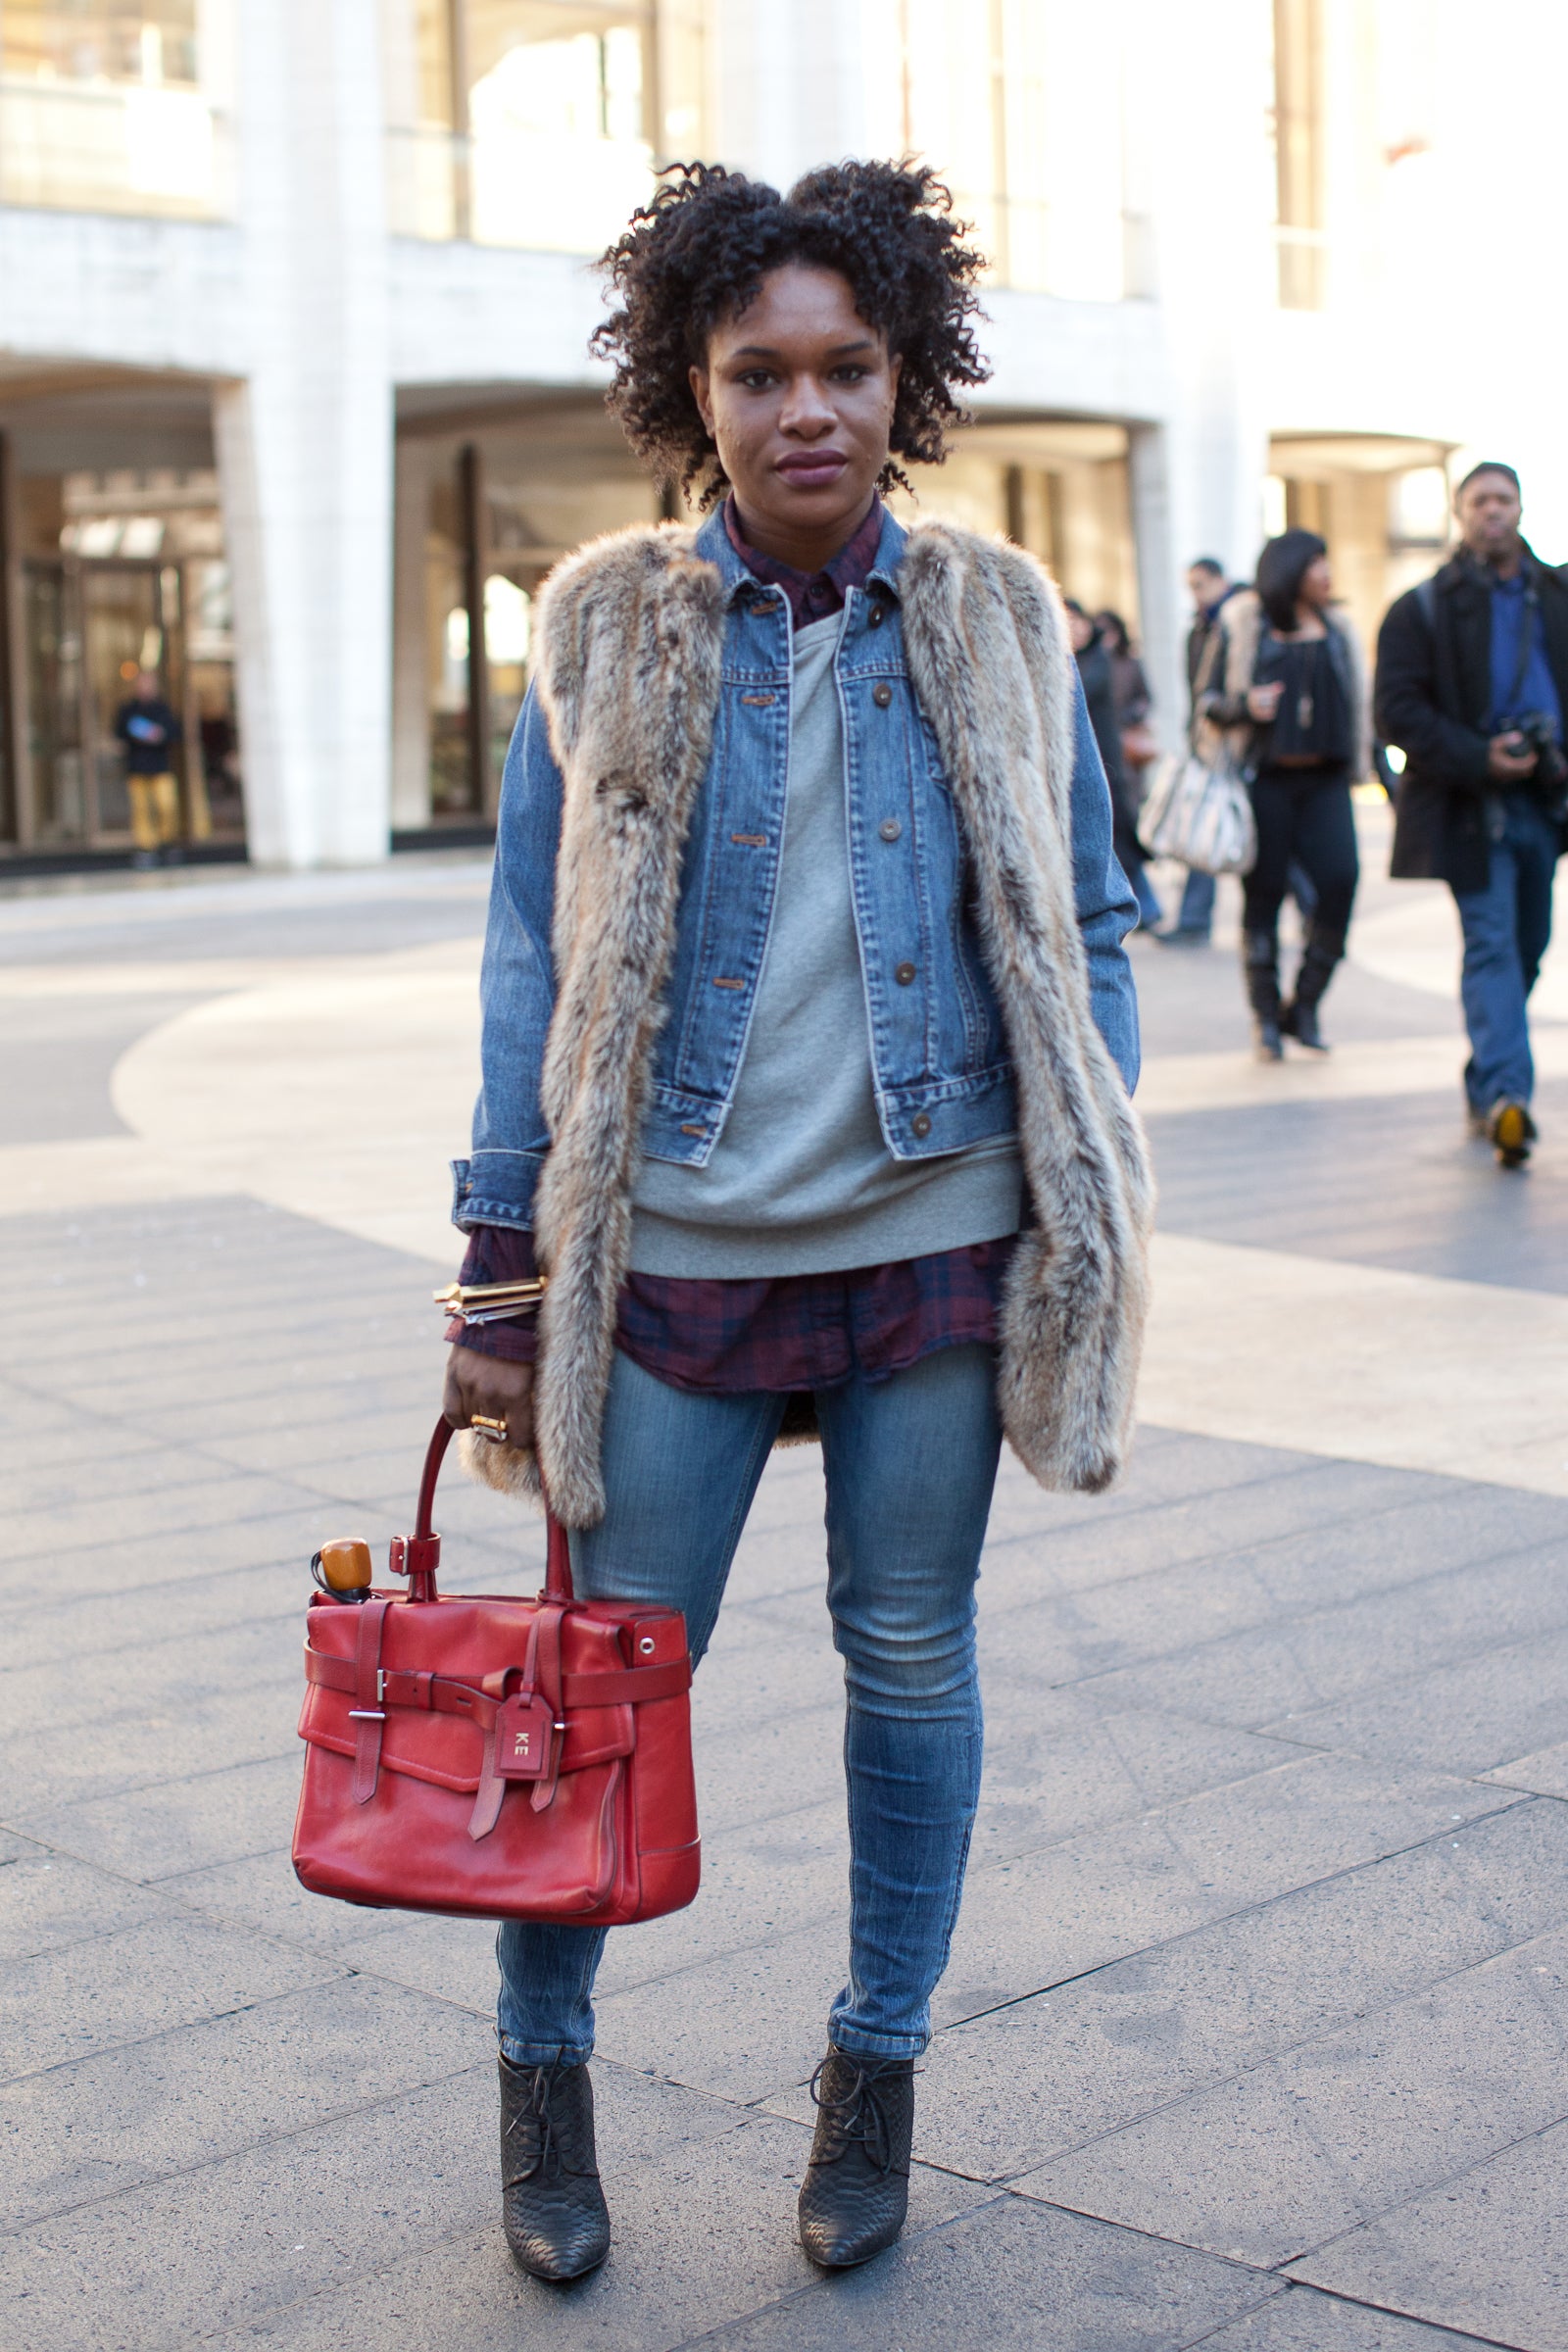 Street Style: Cool, Cozy Holiday Looks